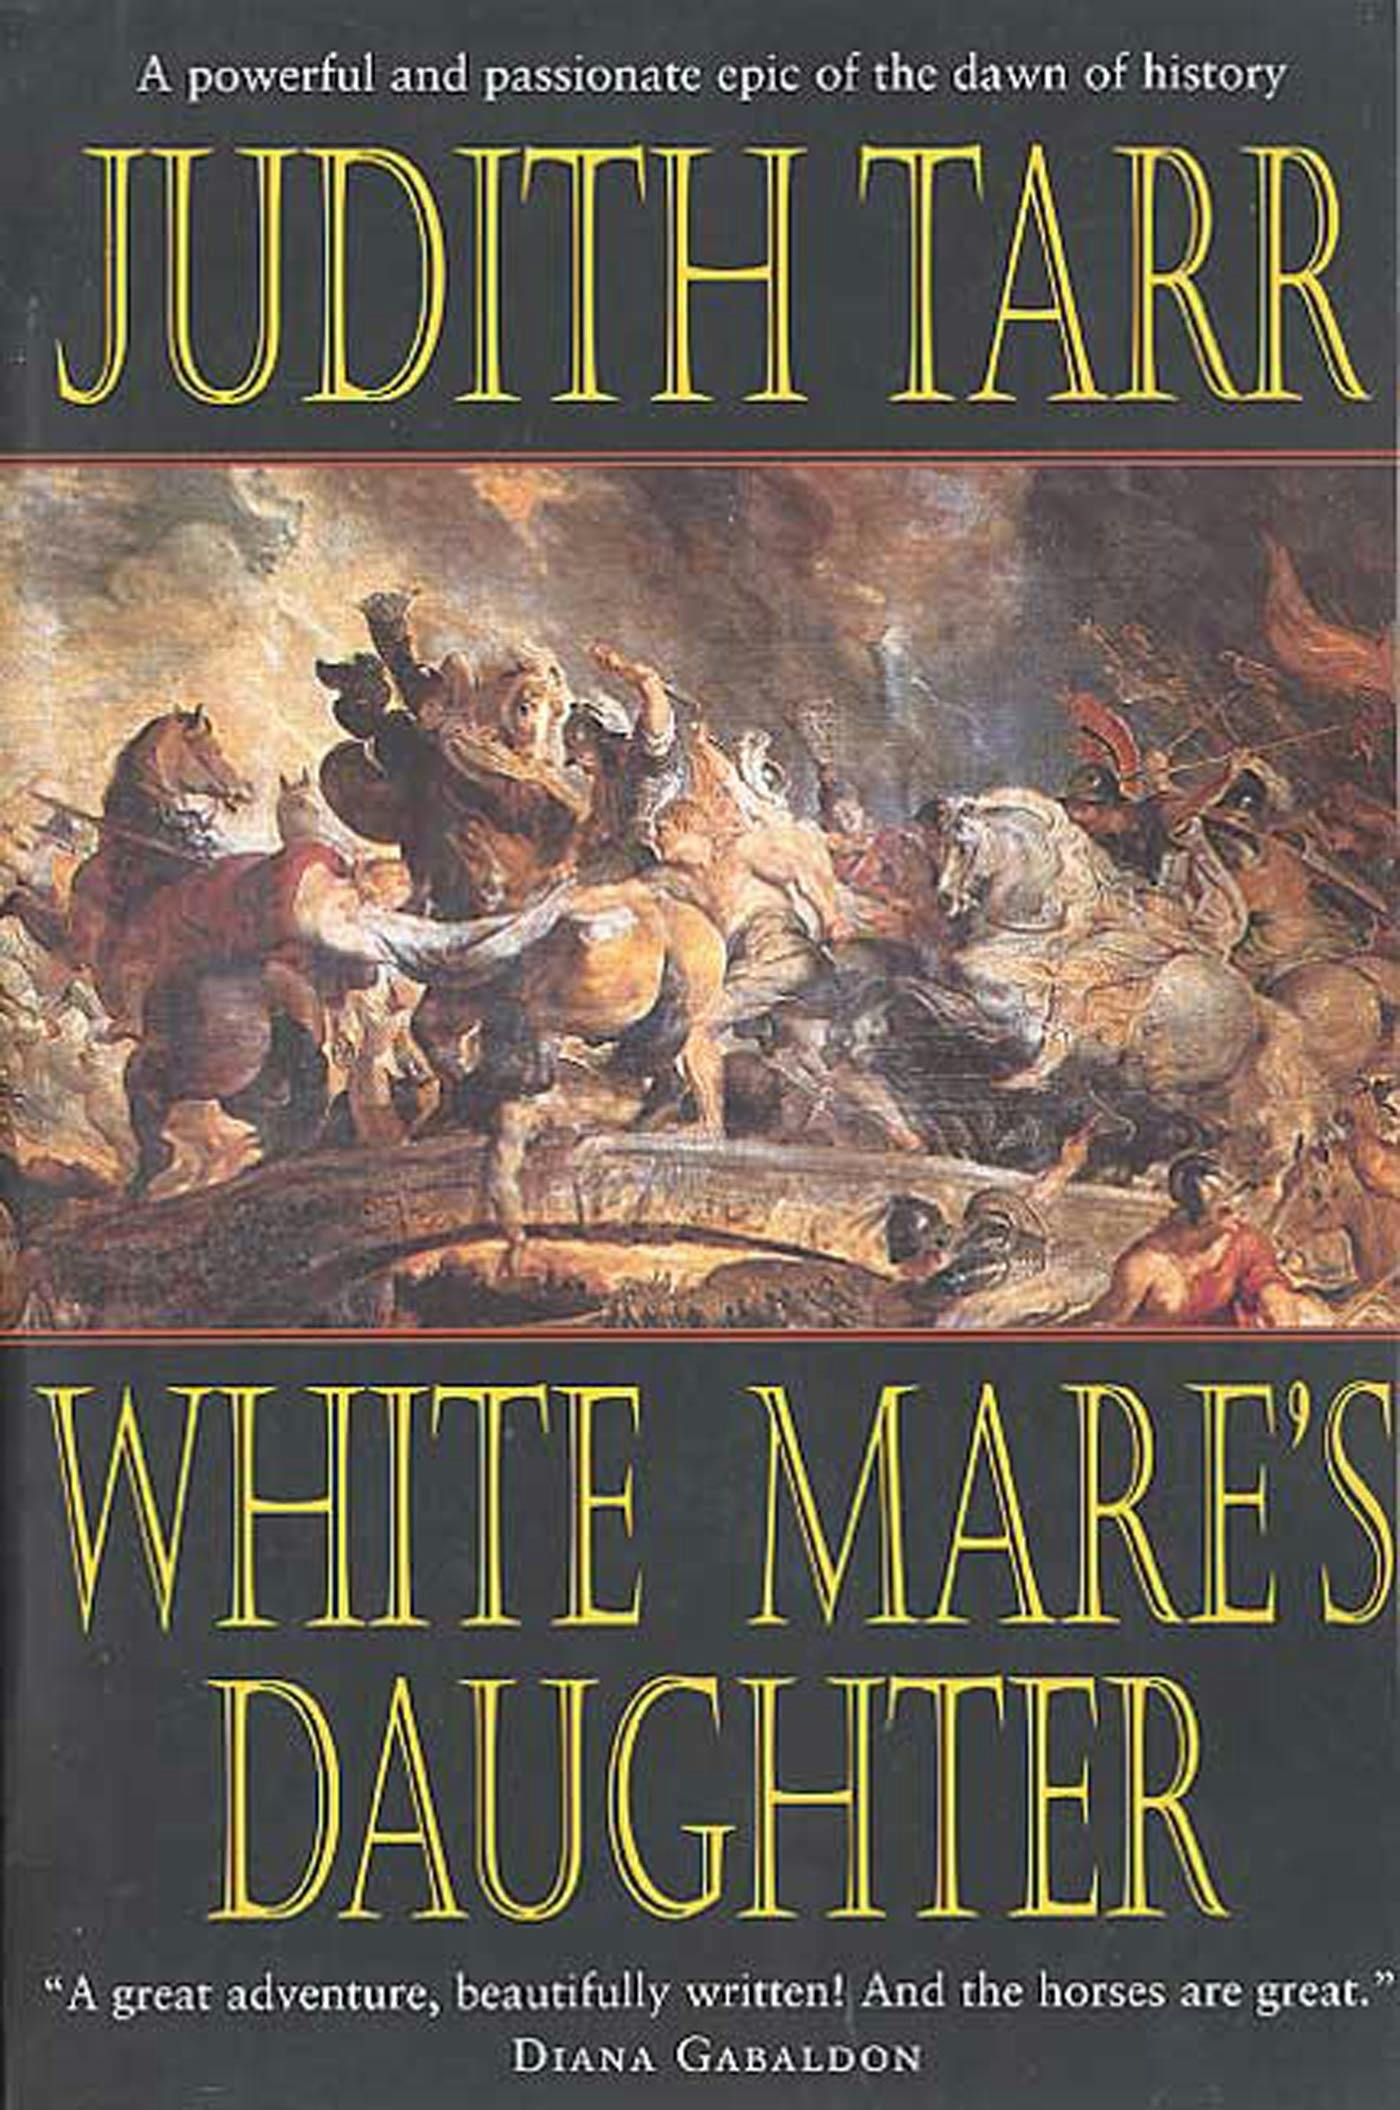 Cover for the book titled as: The White Mare's Daughter